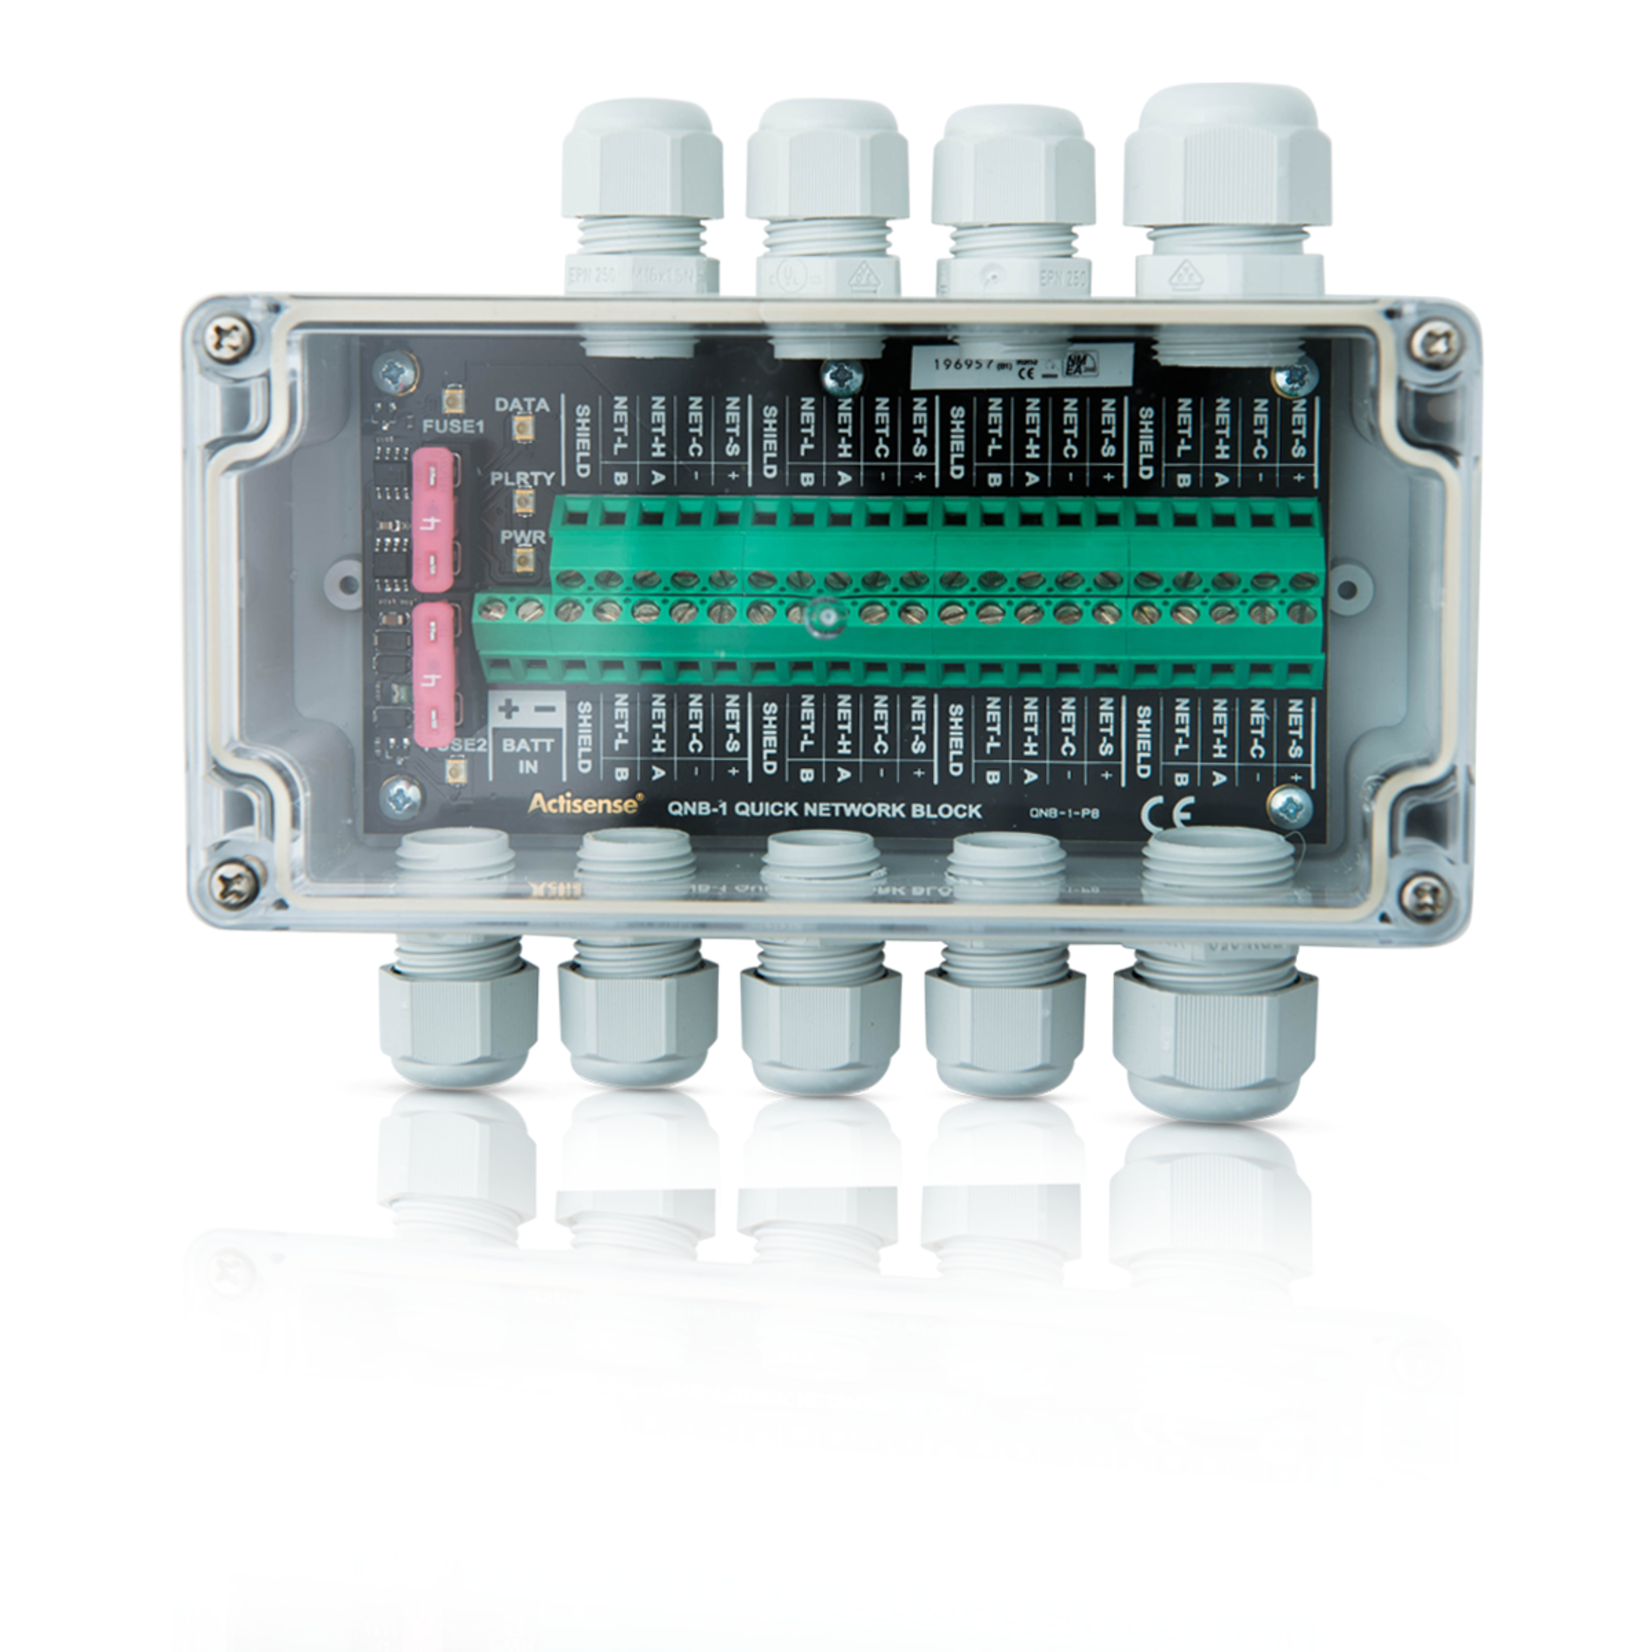 Actisense NMEA 2000 Network Block, 6 screw terminal drops, power feed and diagnostic features